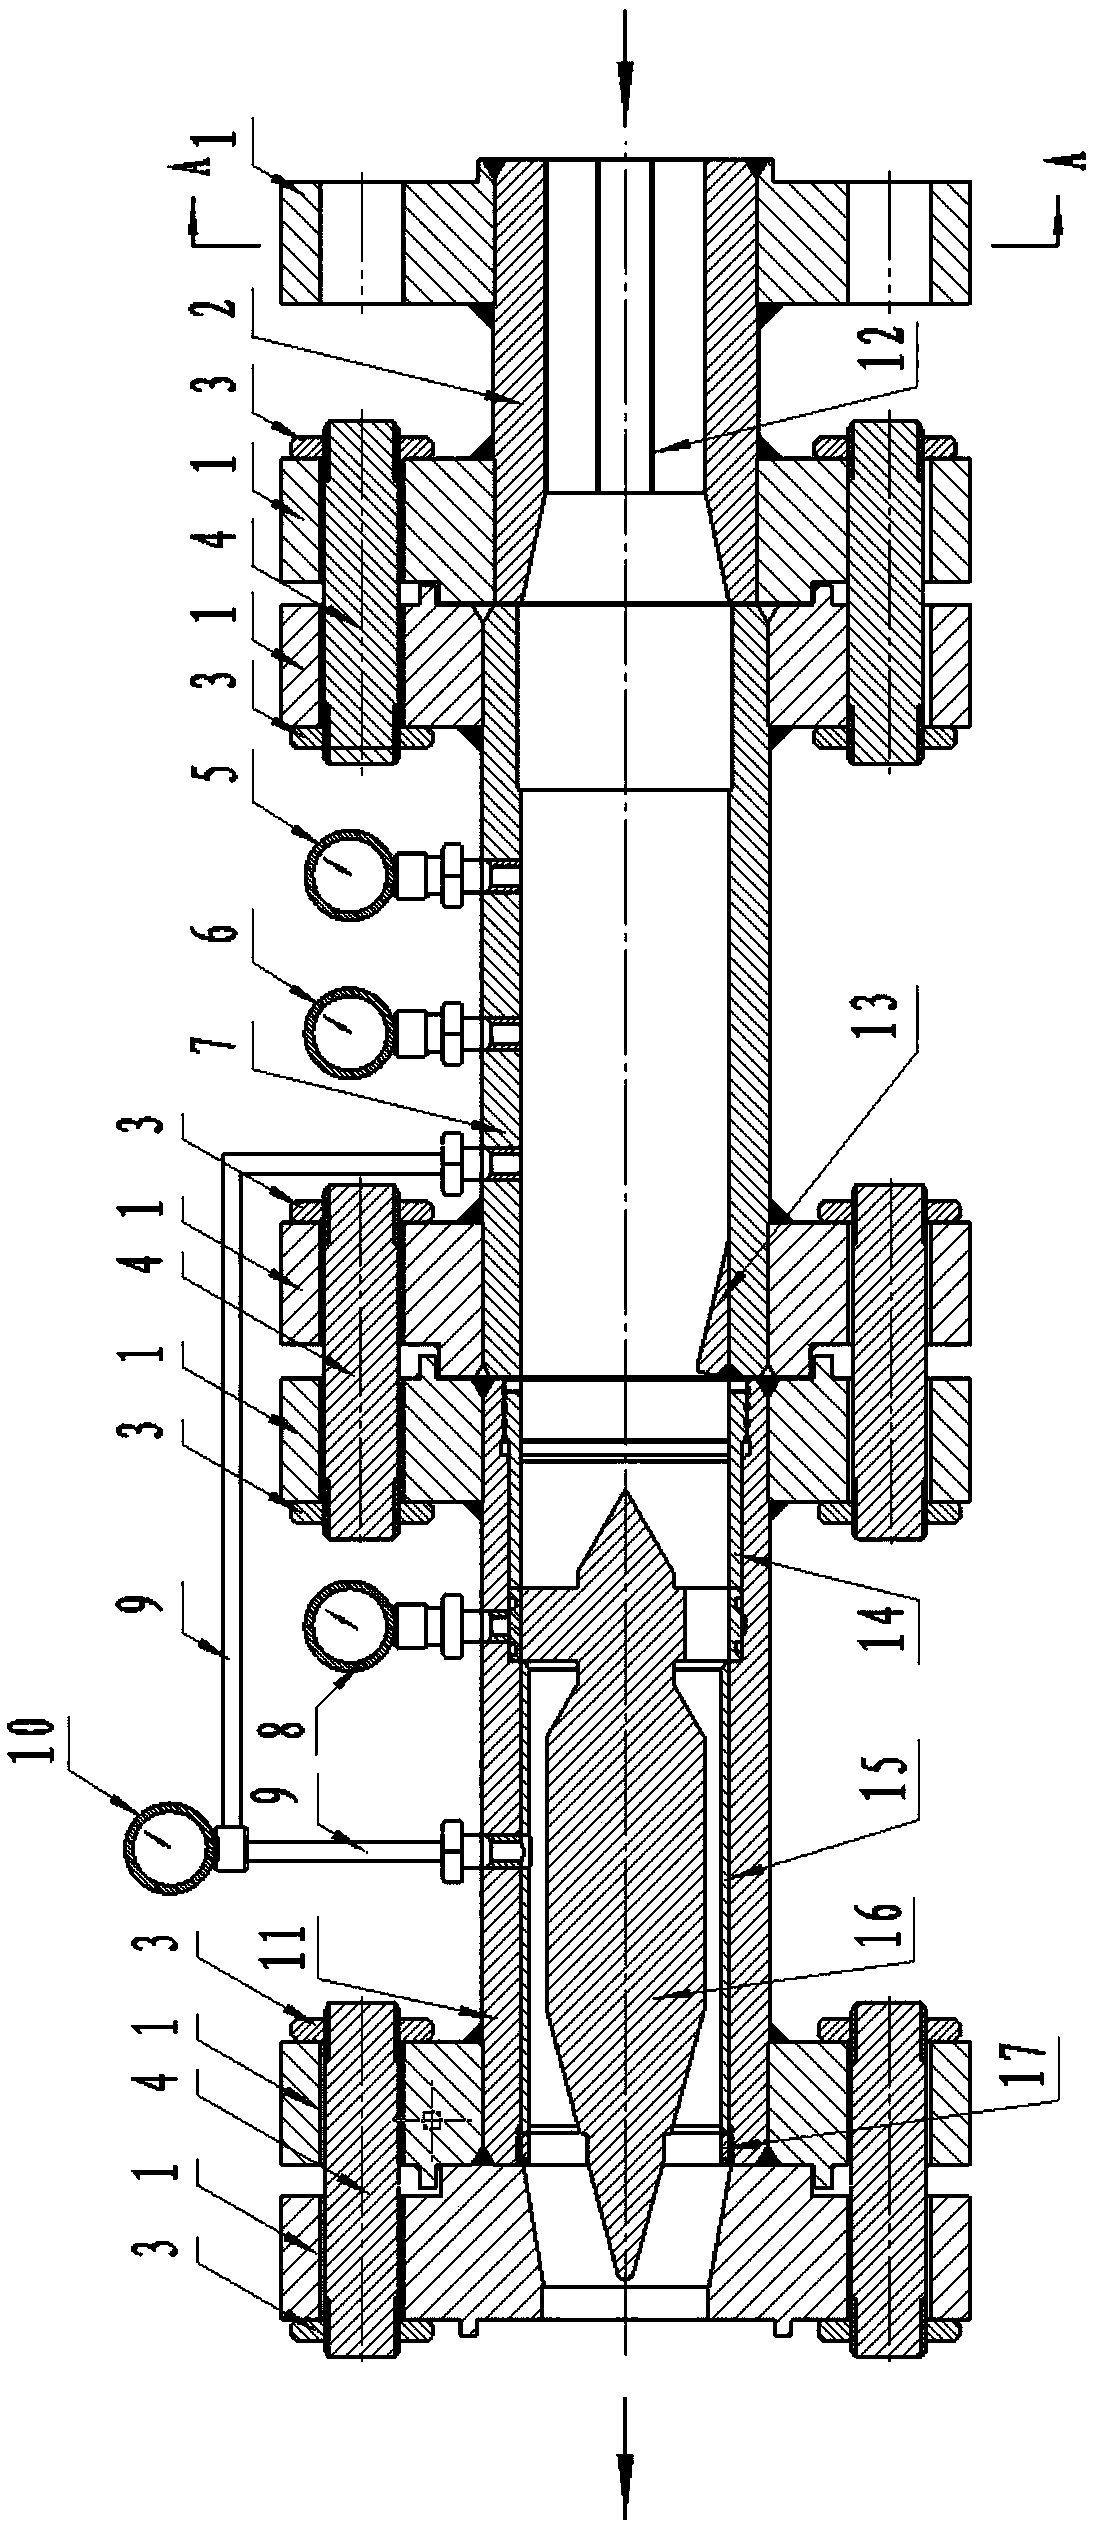 Integrative differential pressure type gas-liquid two-phase flow wellhead monitoring device